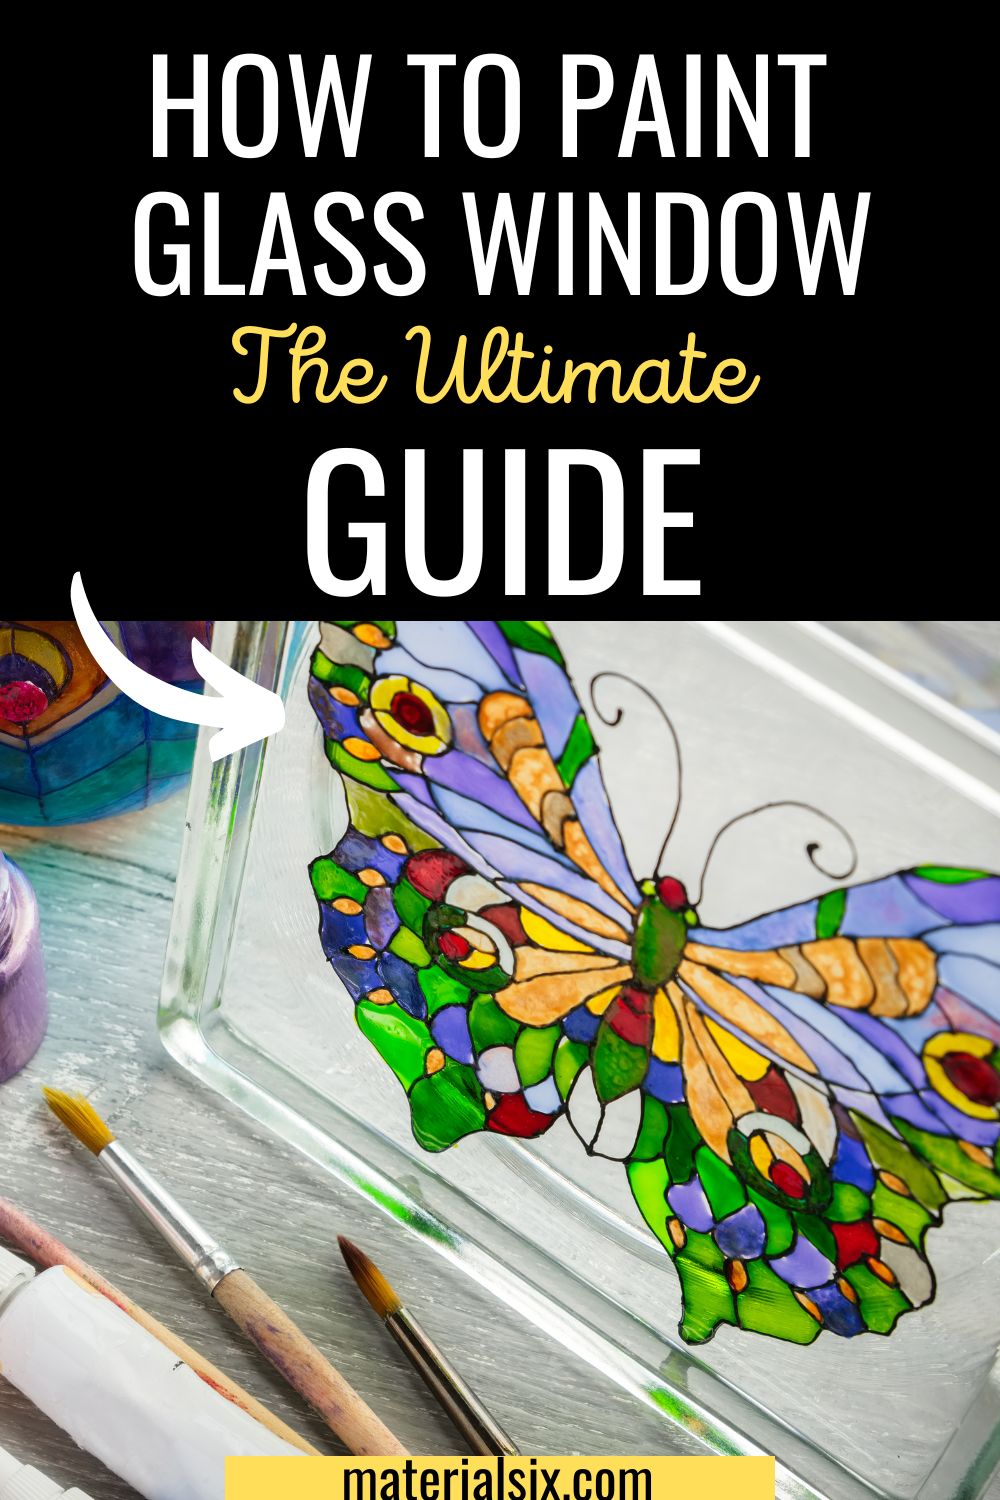 How to Paint Glass Windows (The Ultimate Guide)